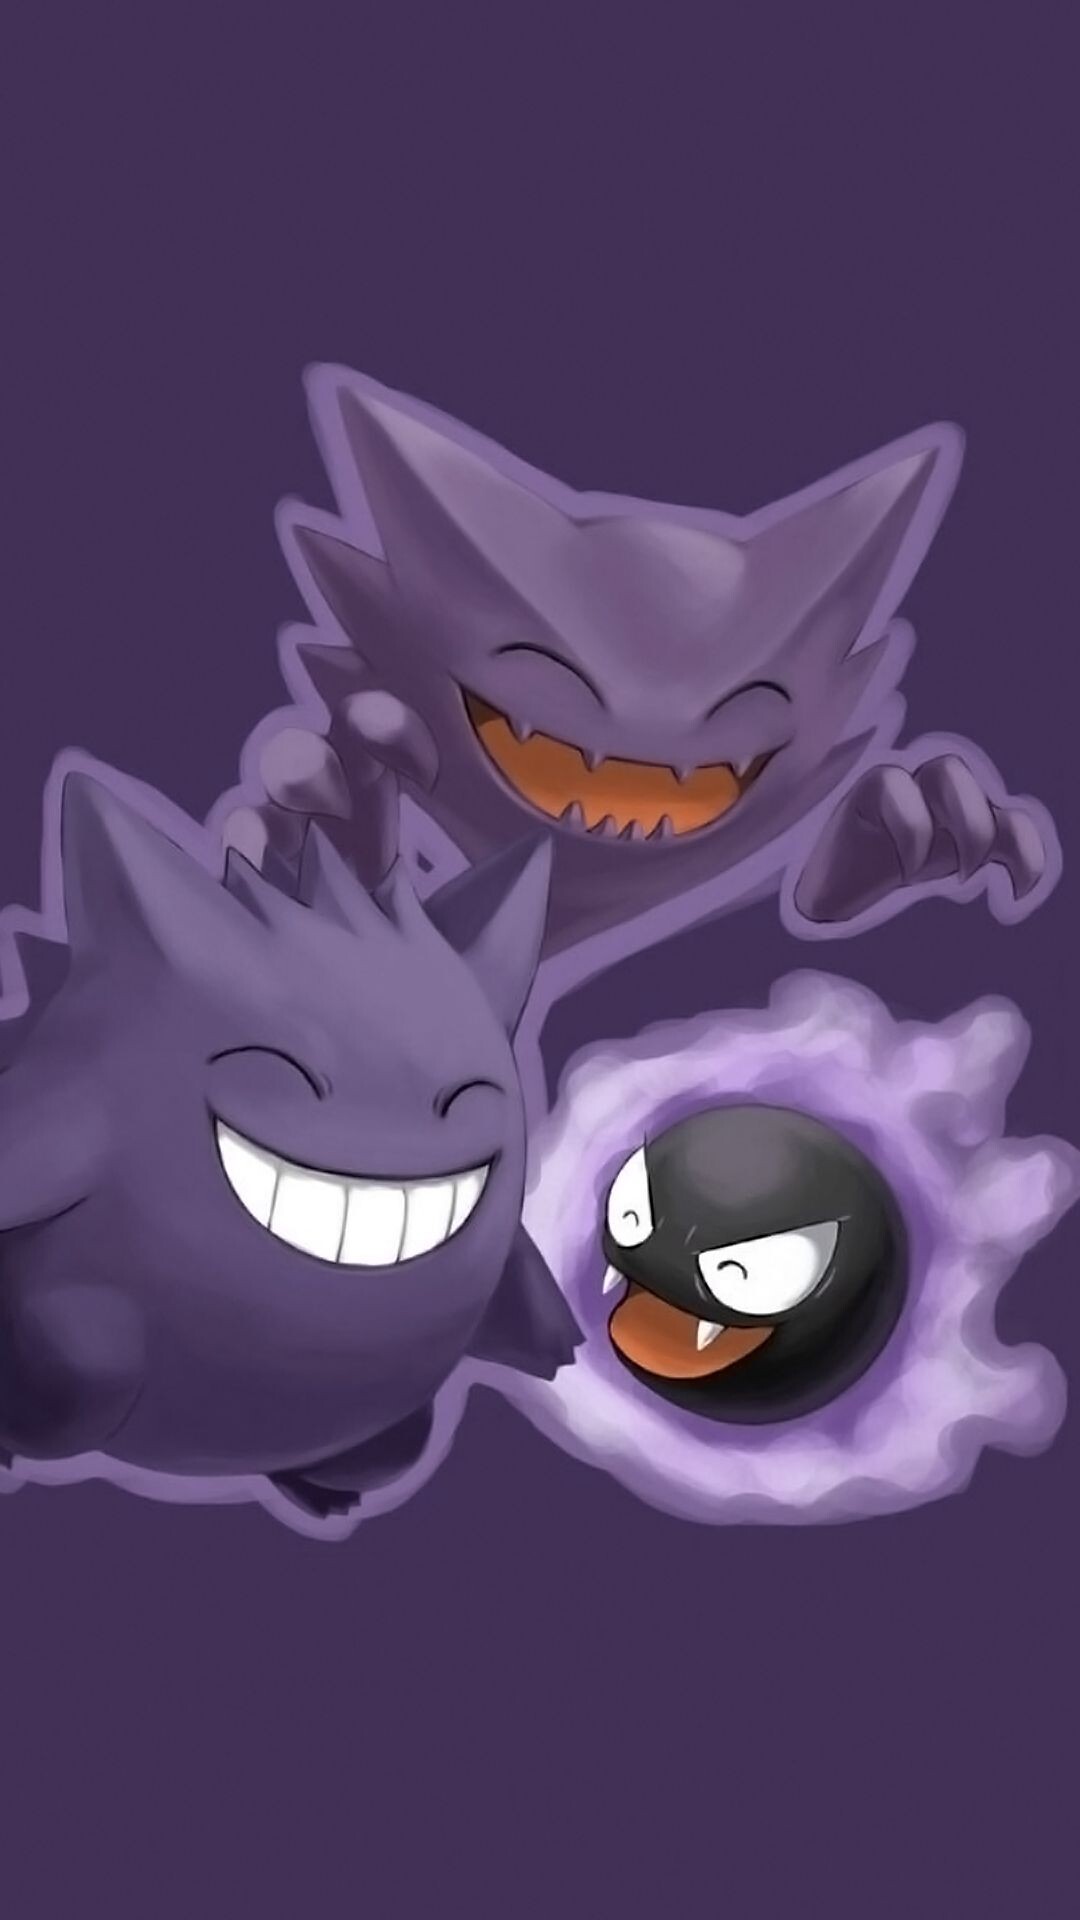 Gastly: Haunter, Gengar, Pokemon that largely composed of vaporous matter, Pokemon that has no real shape. 1080x1920 Full HD Wallpaper.